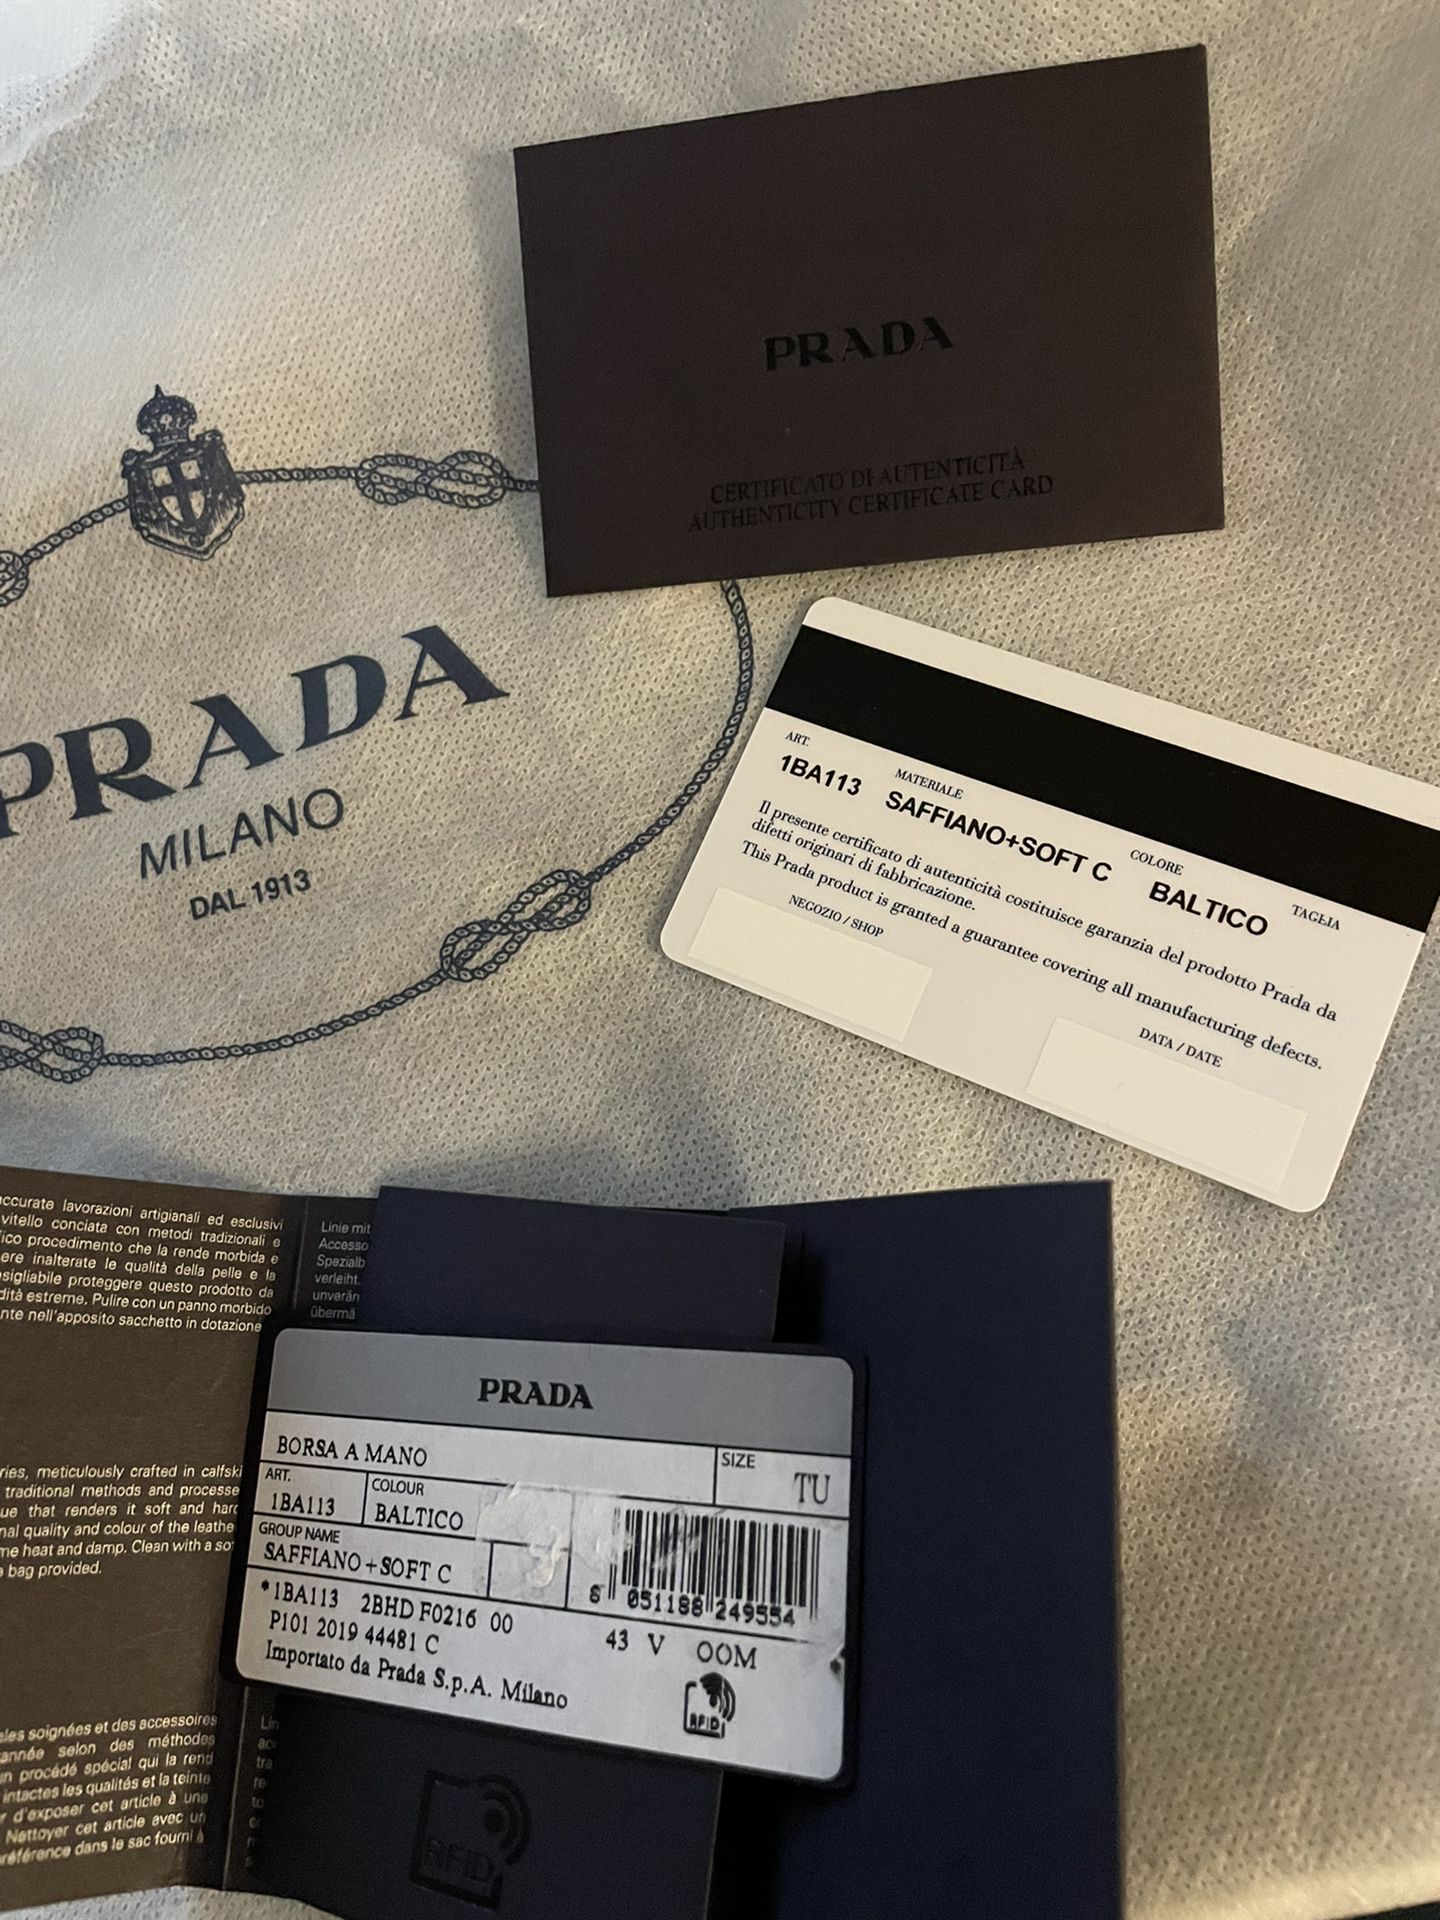 Real Authentic Prada Bag For Sale ! Great Great Condition for Sale in  Brooklyn, NY - OfferUp